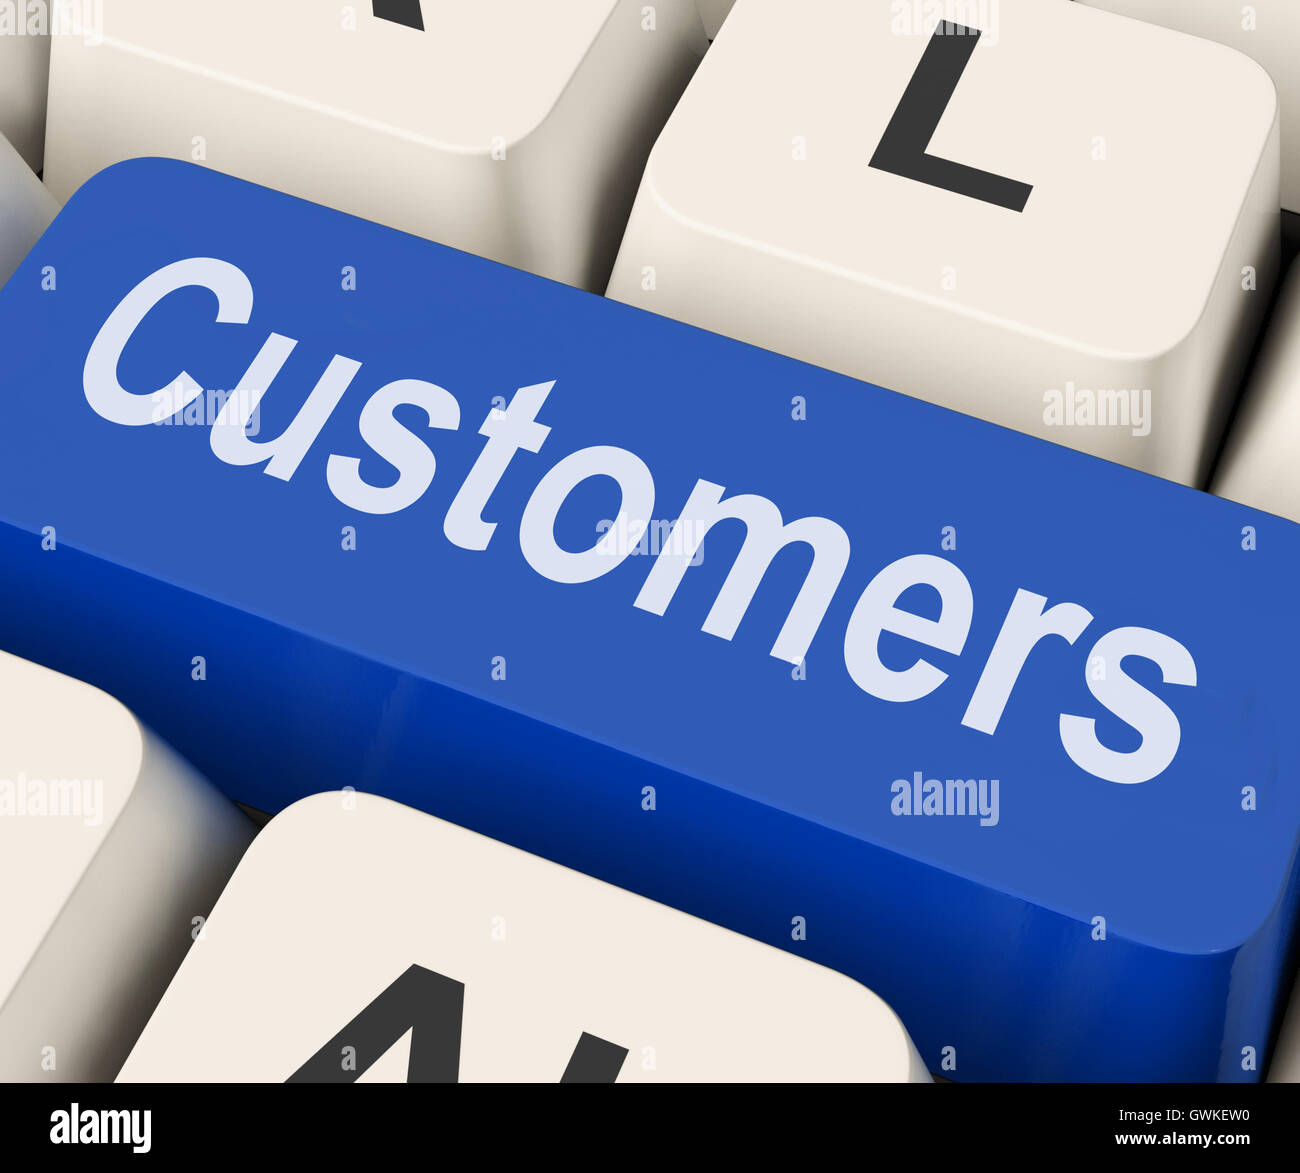 Customers Key Means Consumer Or Buyer Stock Photo